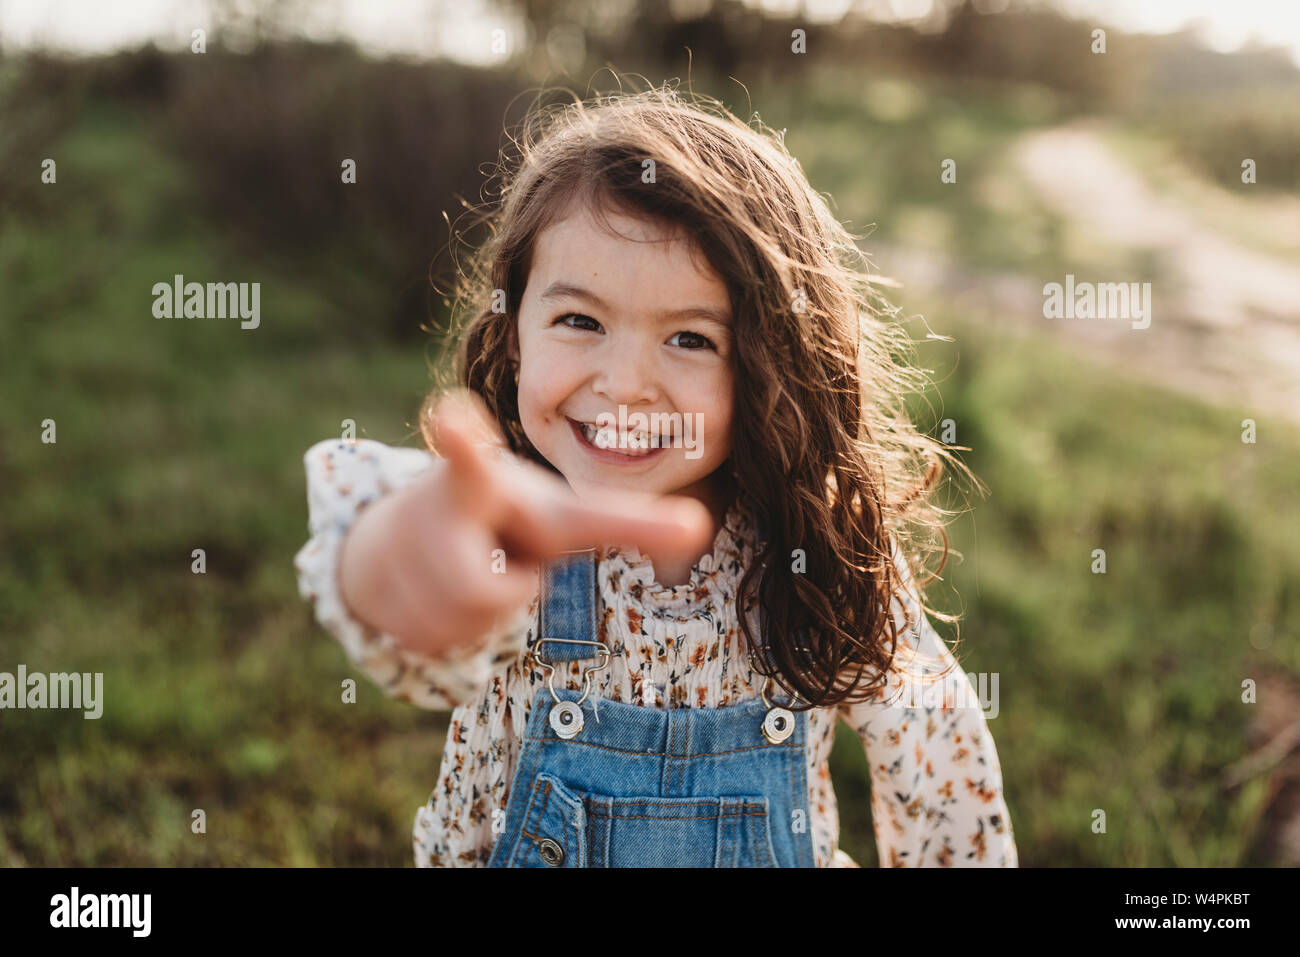 Close up portrait of young school-aged girl smiling with dimples Stock Photo